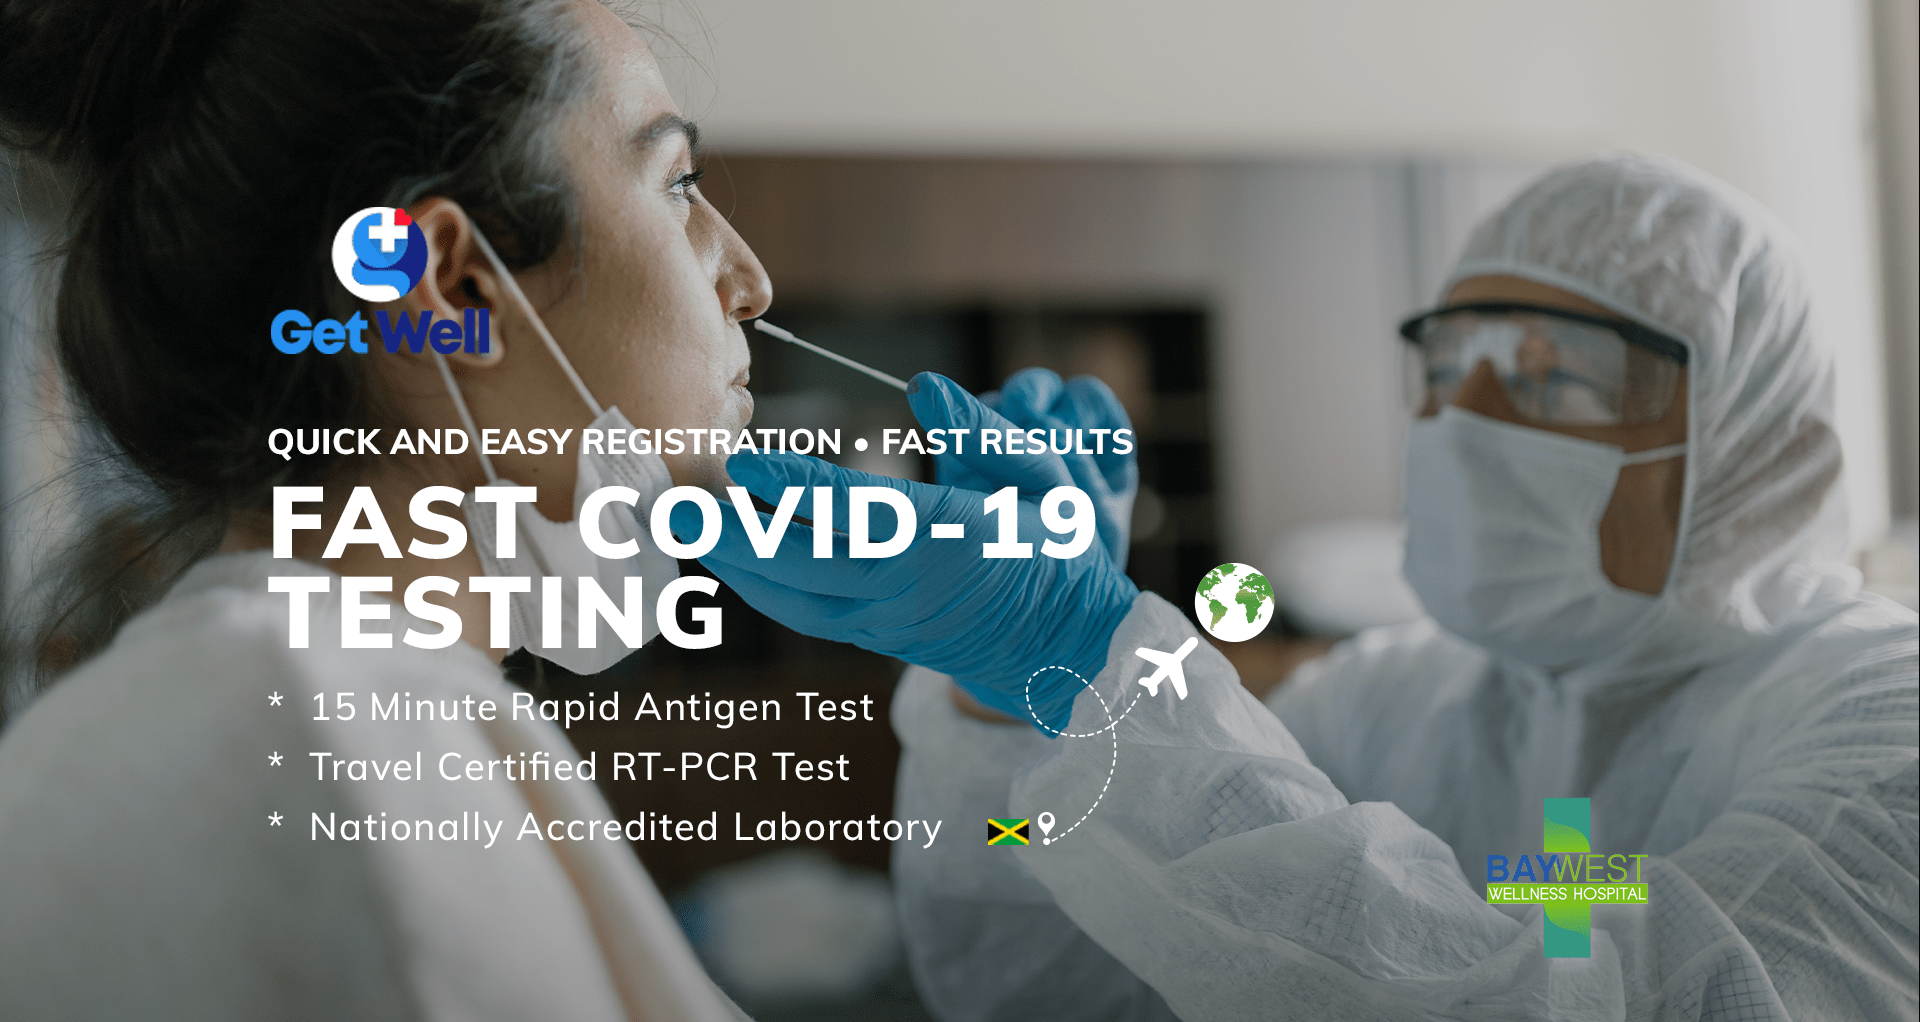 What is a pcr test for covid